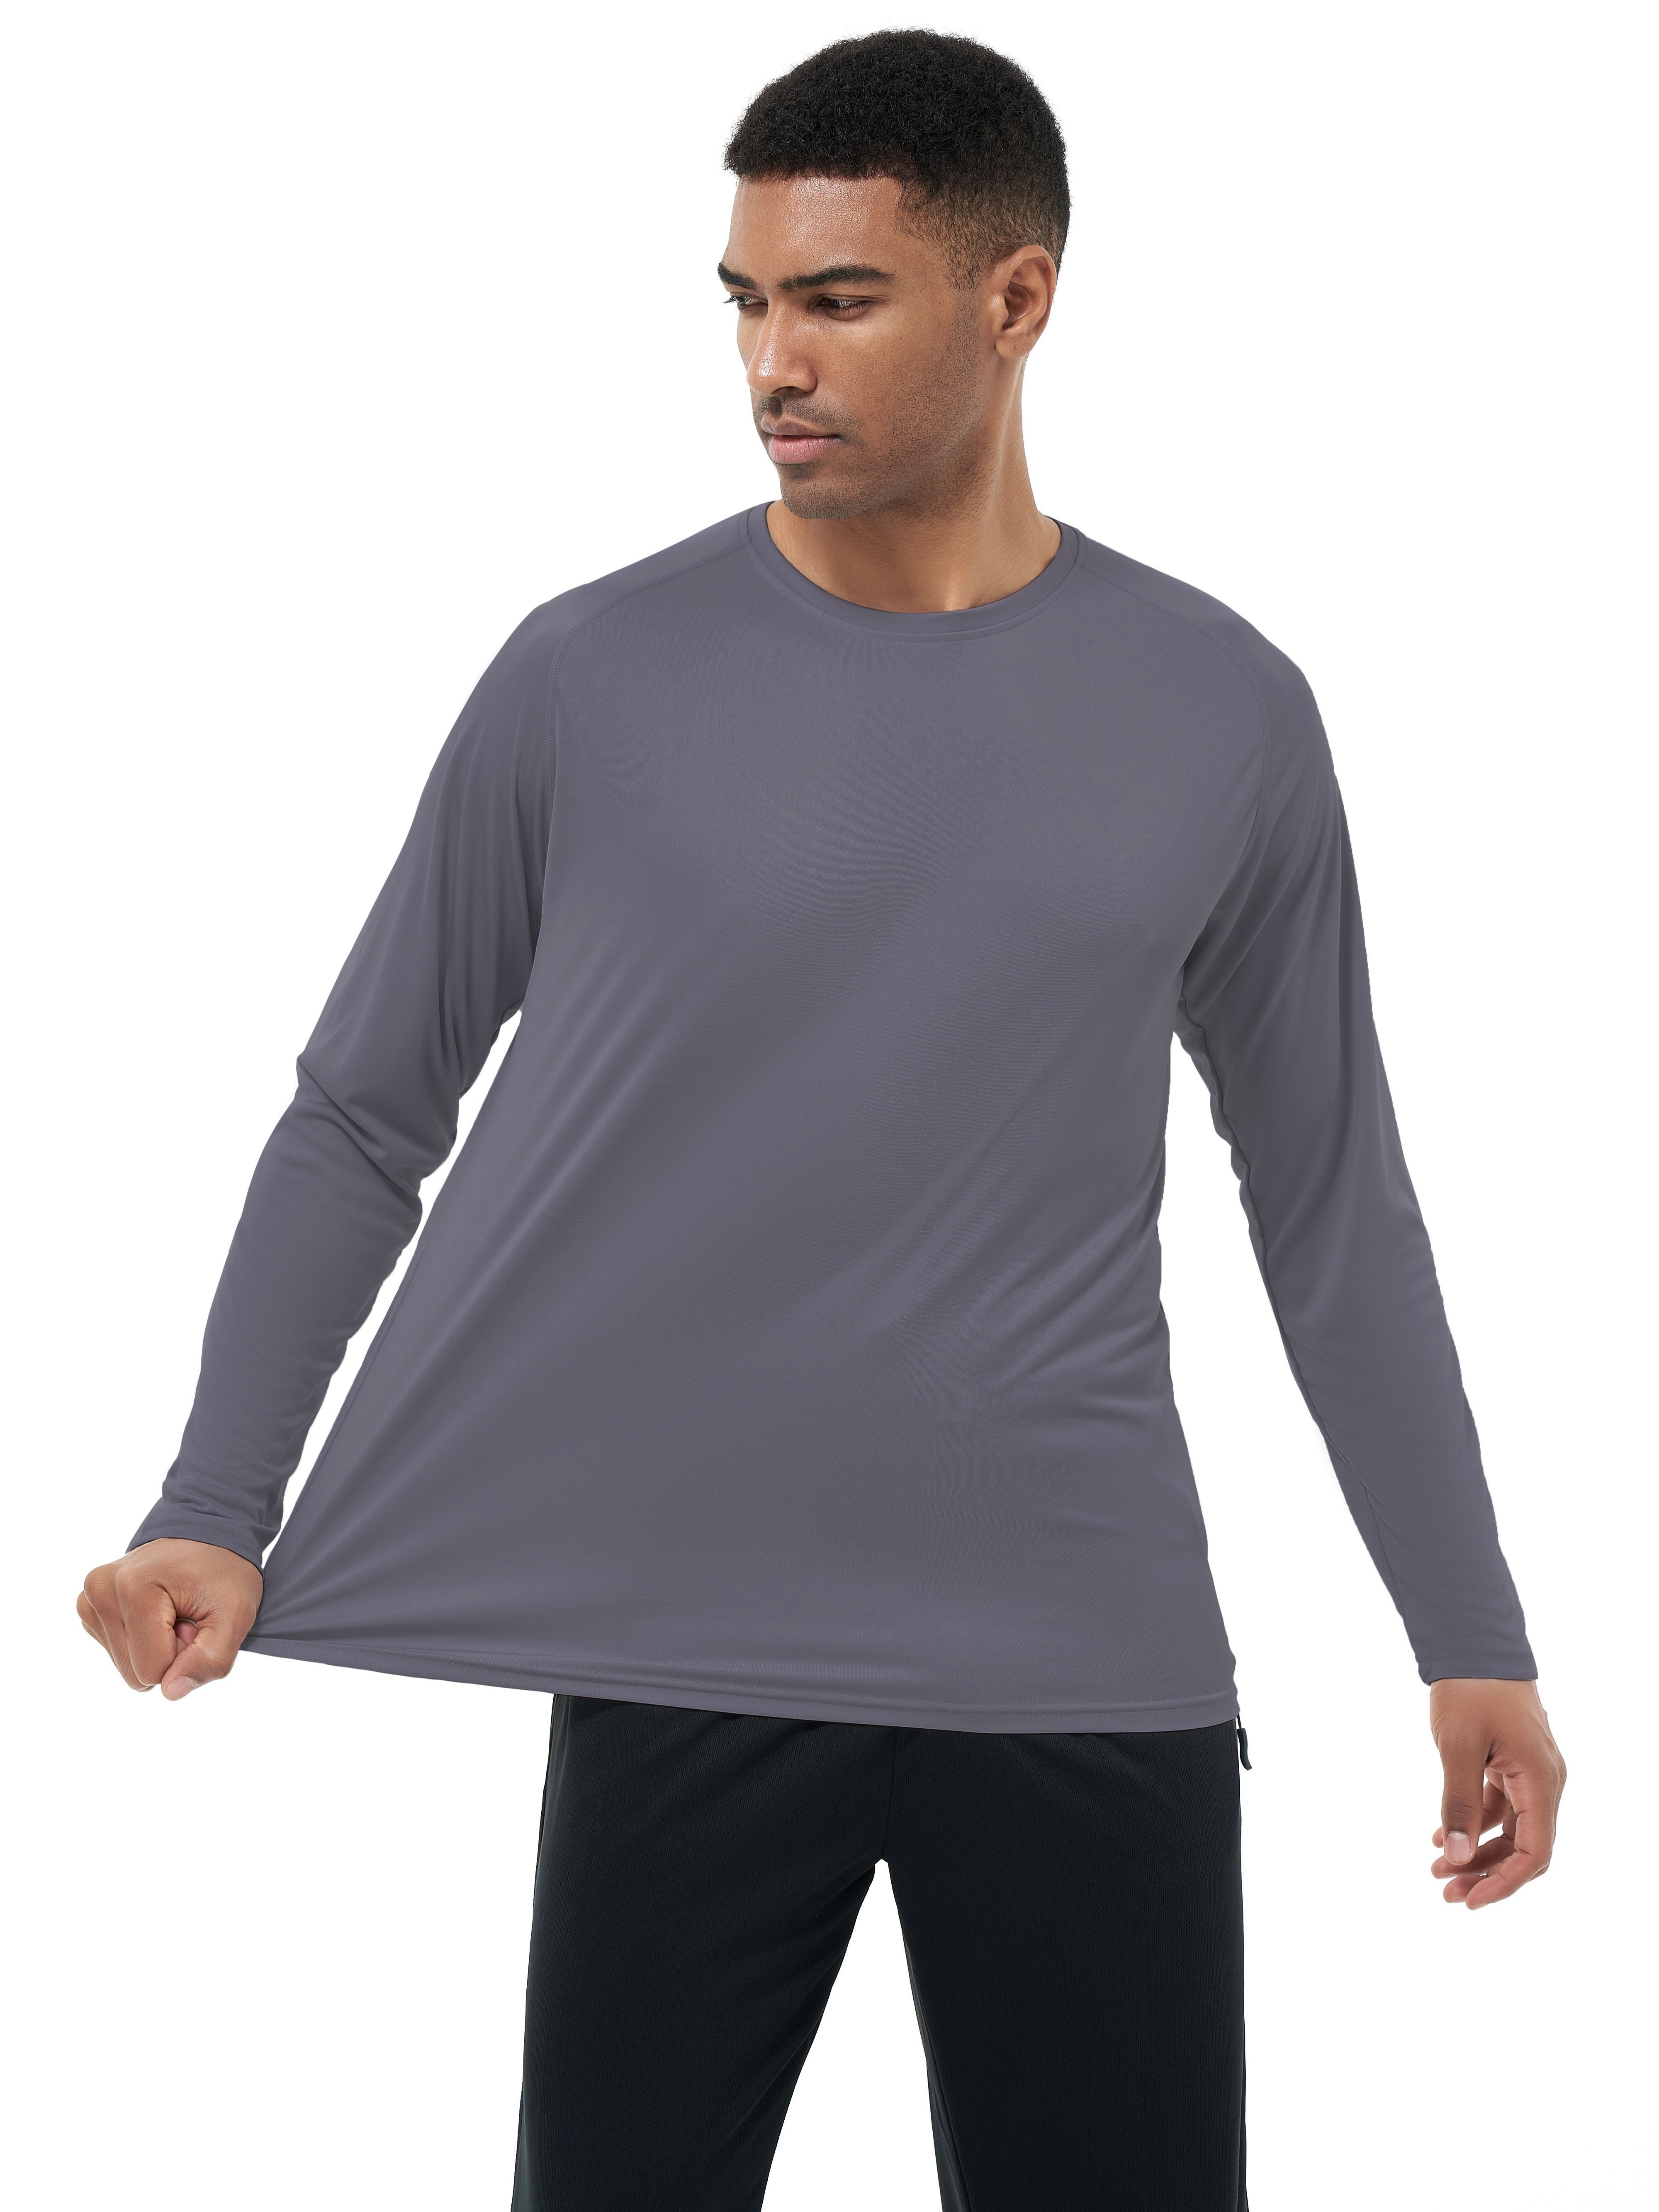 UV 30 Sun Protection LS Men's T-Shirt (2 Awesome Designs) XSmall / Surf Dogs